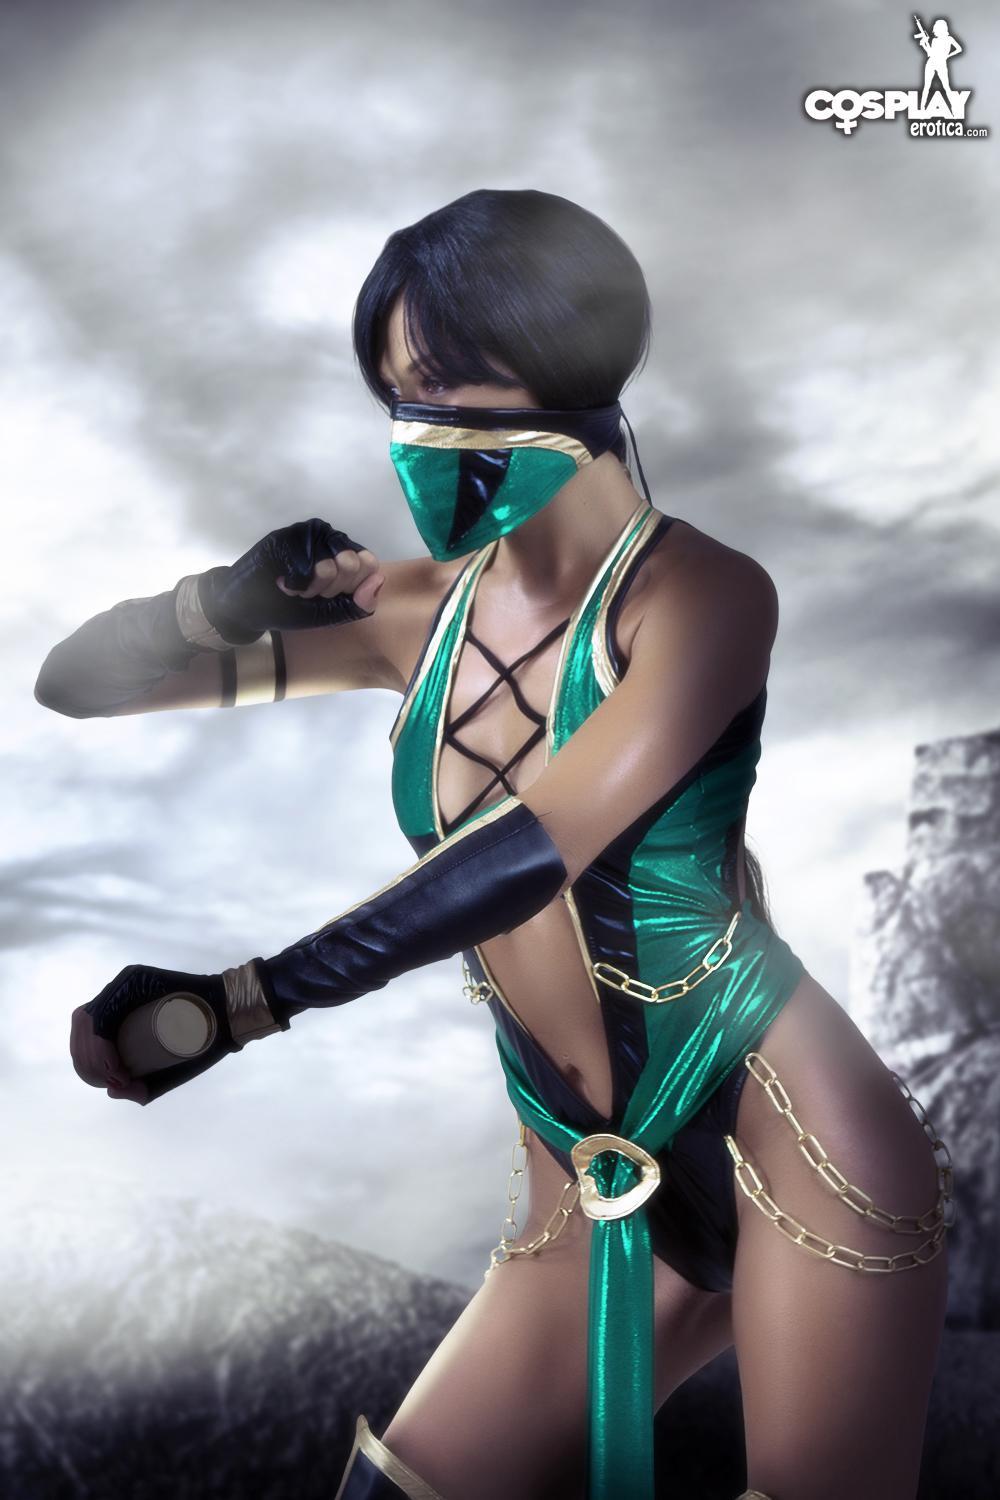 Cosplay babe Brownie dresses as a super hot Jade from Mortal Kombat #53563420